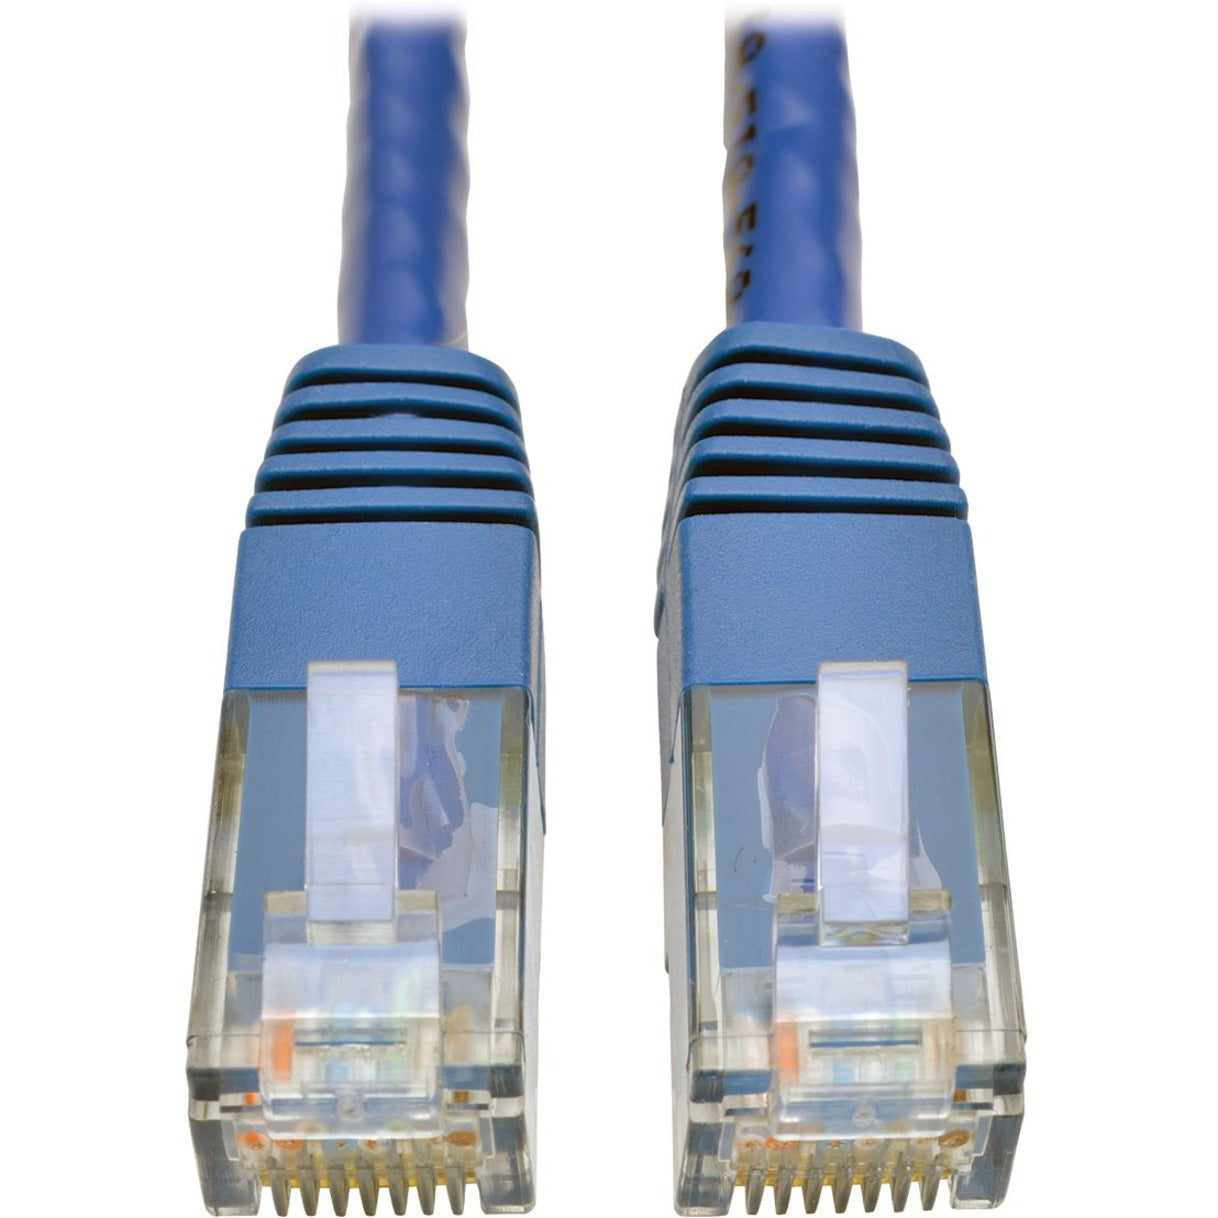 Tripp Lite N200-035-BL Premium RJ-45 Patch Network Cable, 35 ft, Corrosion Resistant, Gold Plated, Blue